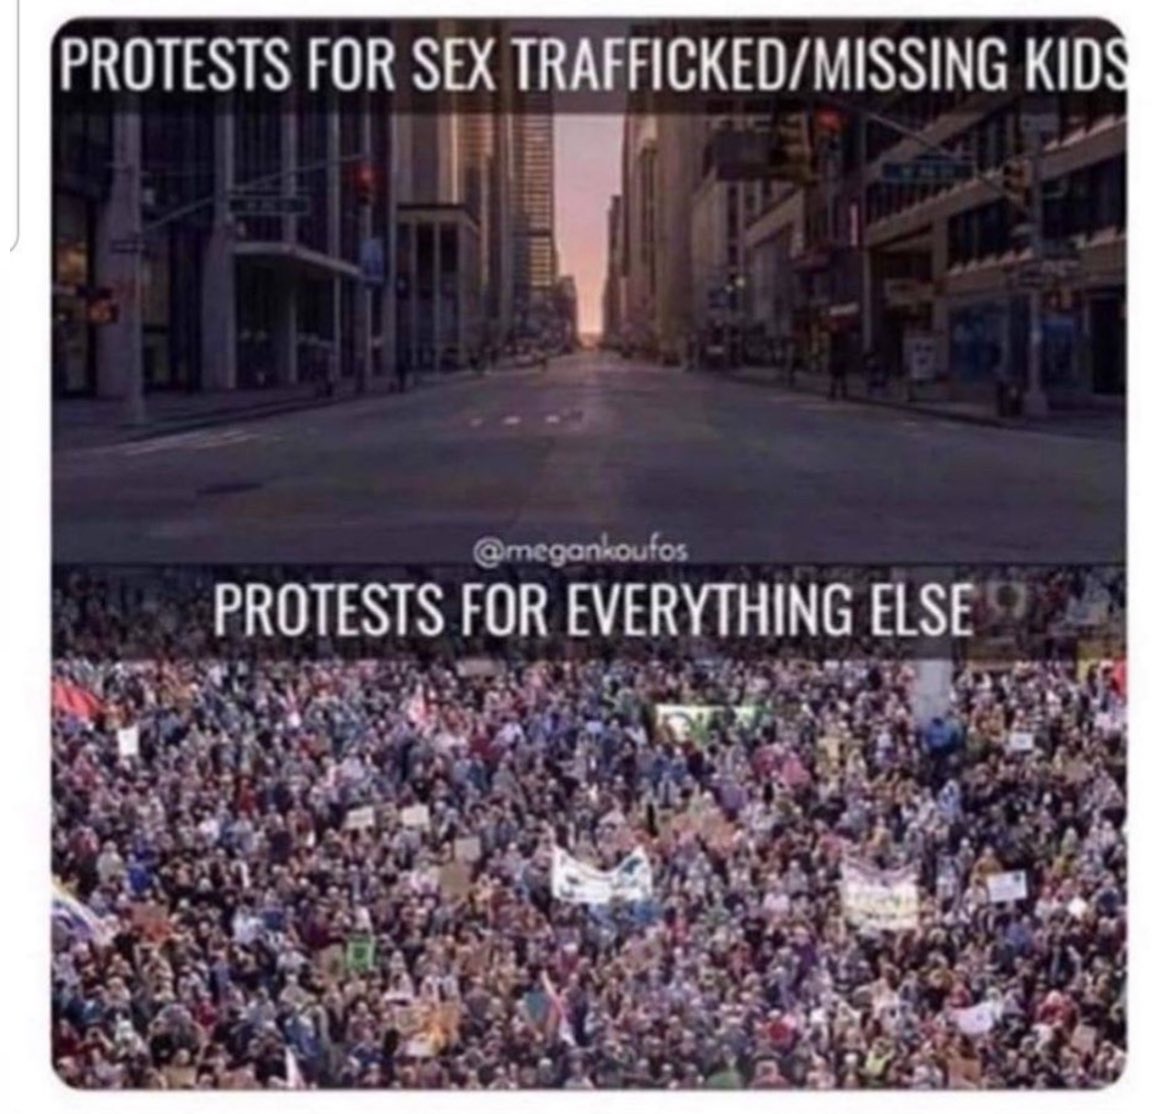 Protests for sex trafficked/ missing kids 
And protests for everything else 
#The_Great_Awakening_ 
#SaveTheChildrenWorldWide